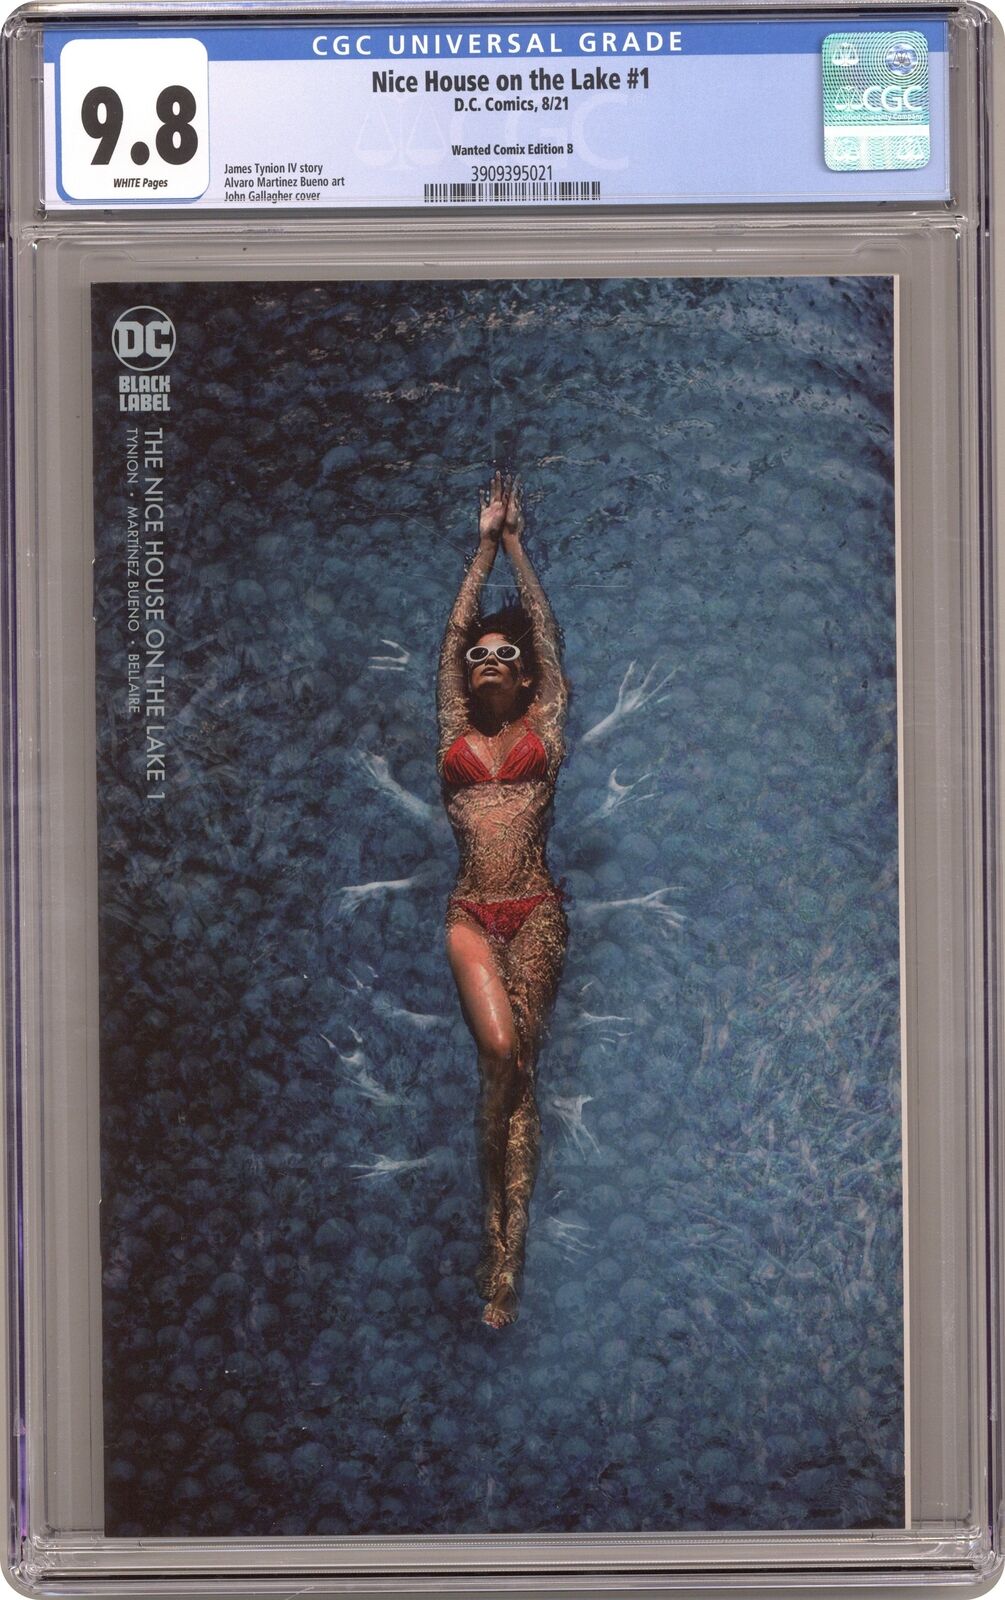 Nice House on the Lake #1 Gallagher Wanted Minimal Variant CGC 9.8 2021